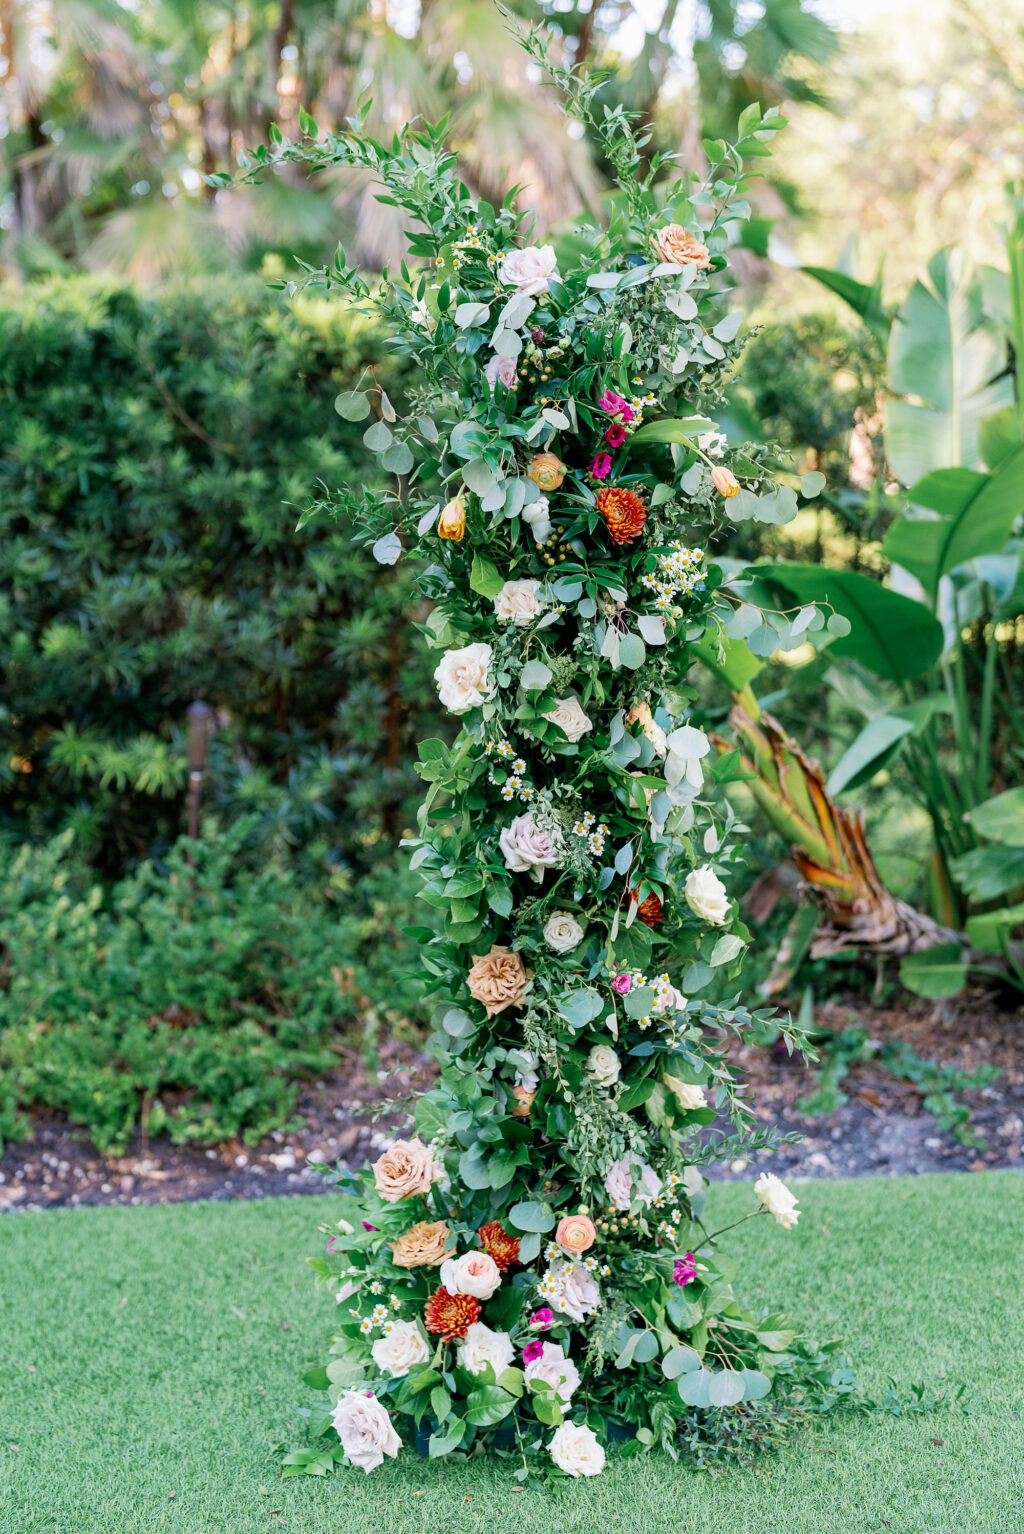 Asymmetrical Orange Crysanthemum, White Roses, and Greenery Flower Stand for Altar Inspiration | Gold Chiavari Chairs for Garden Wedding Ceremony Ideas